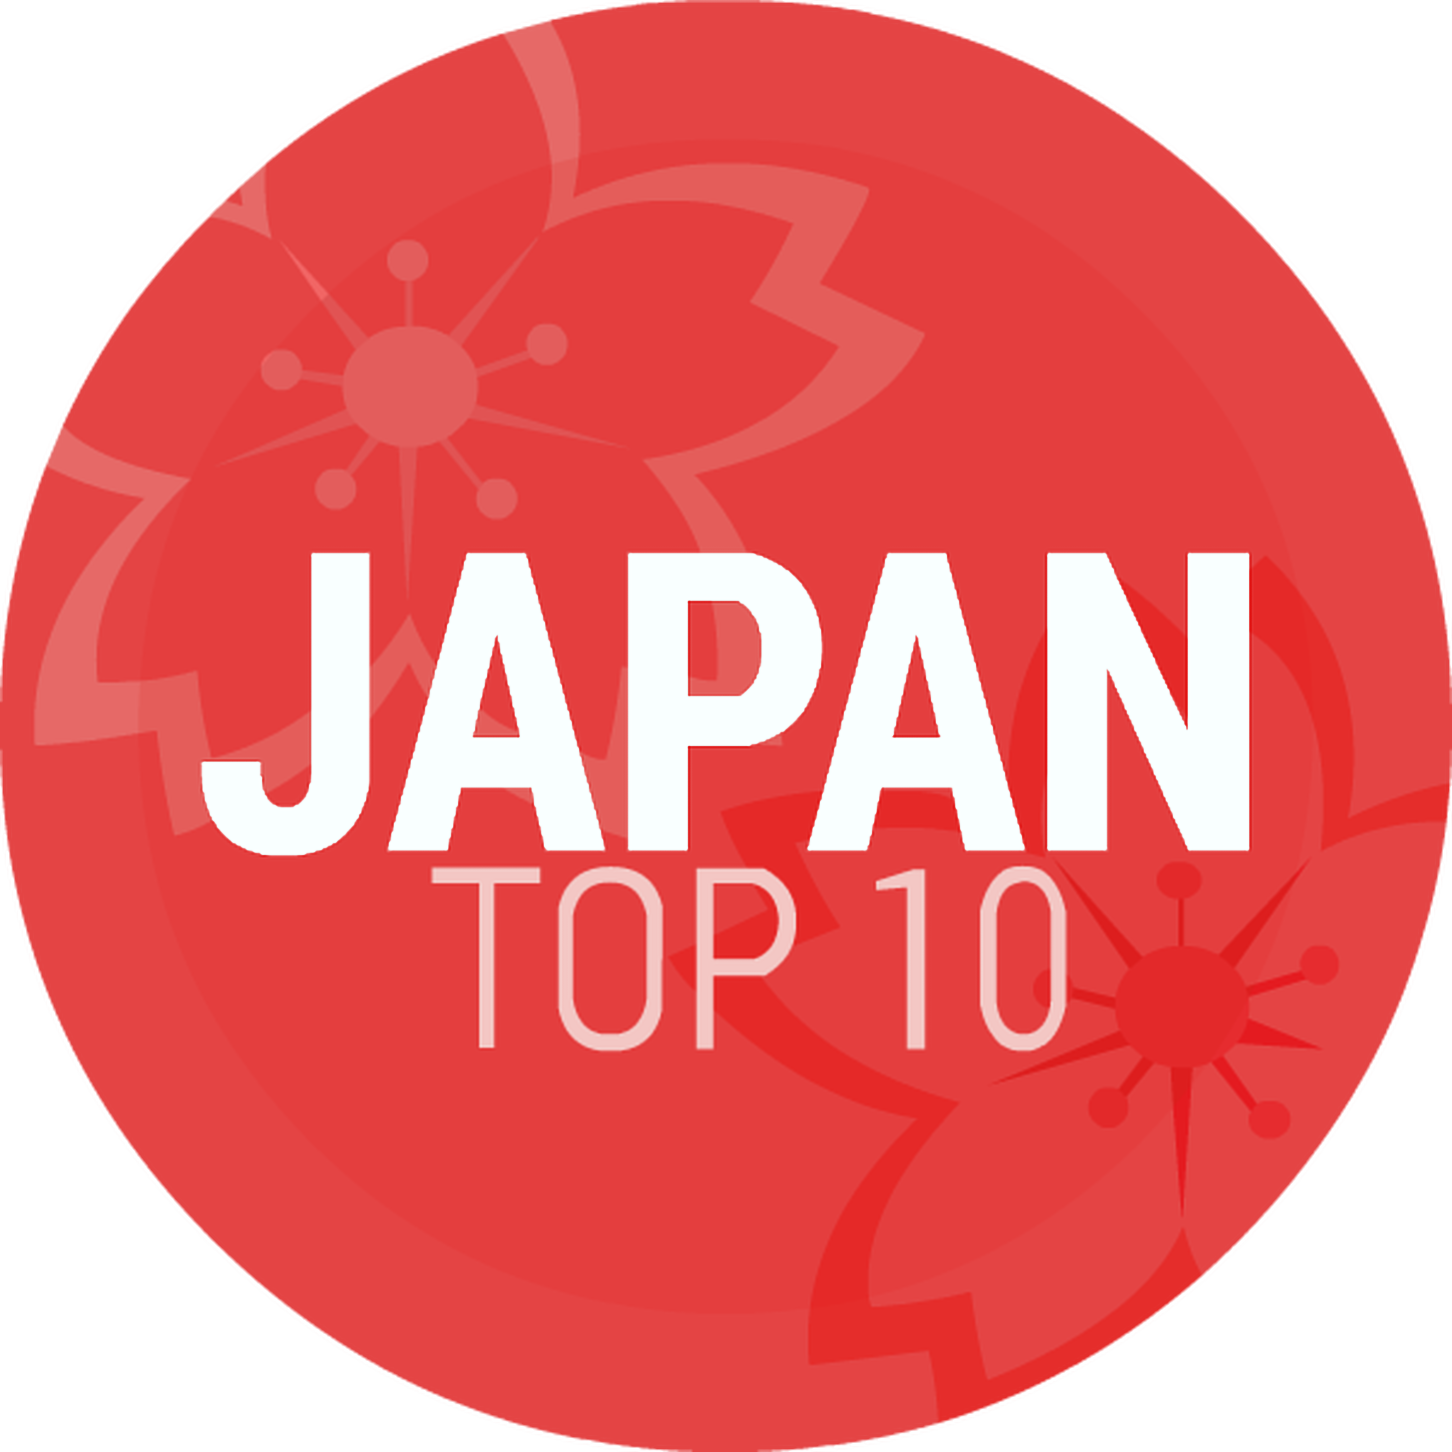 Episode 203: Japan Top 10 Early October 2017 Countdown